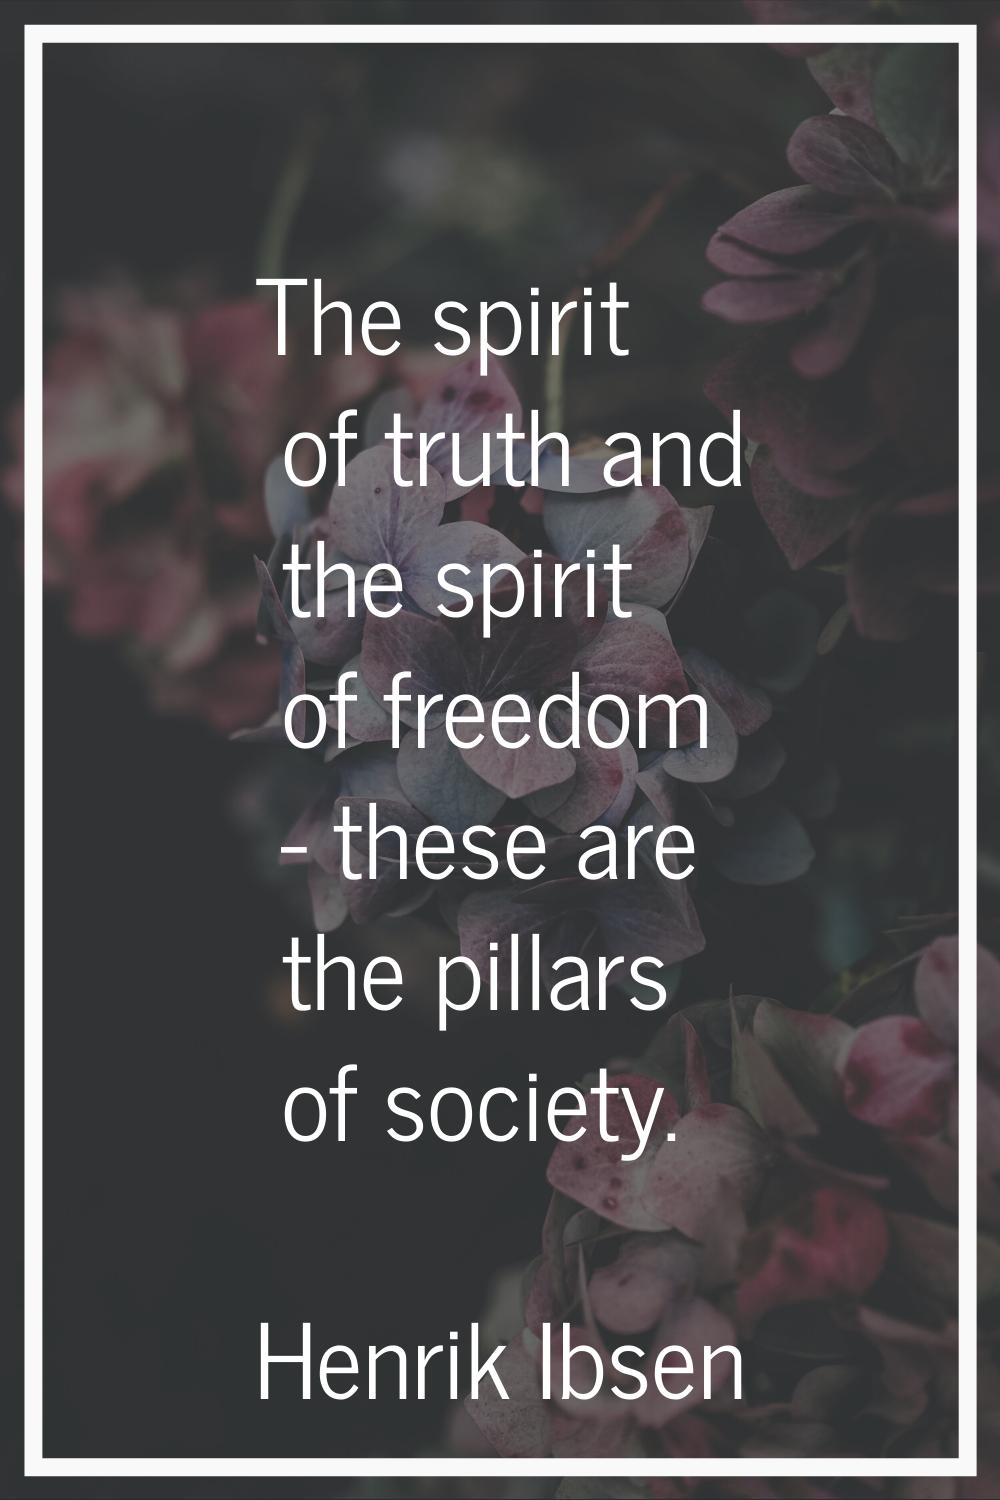 The spirit of truth and the spirit of freedom - these are the pillars of society.